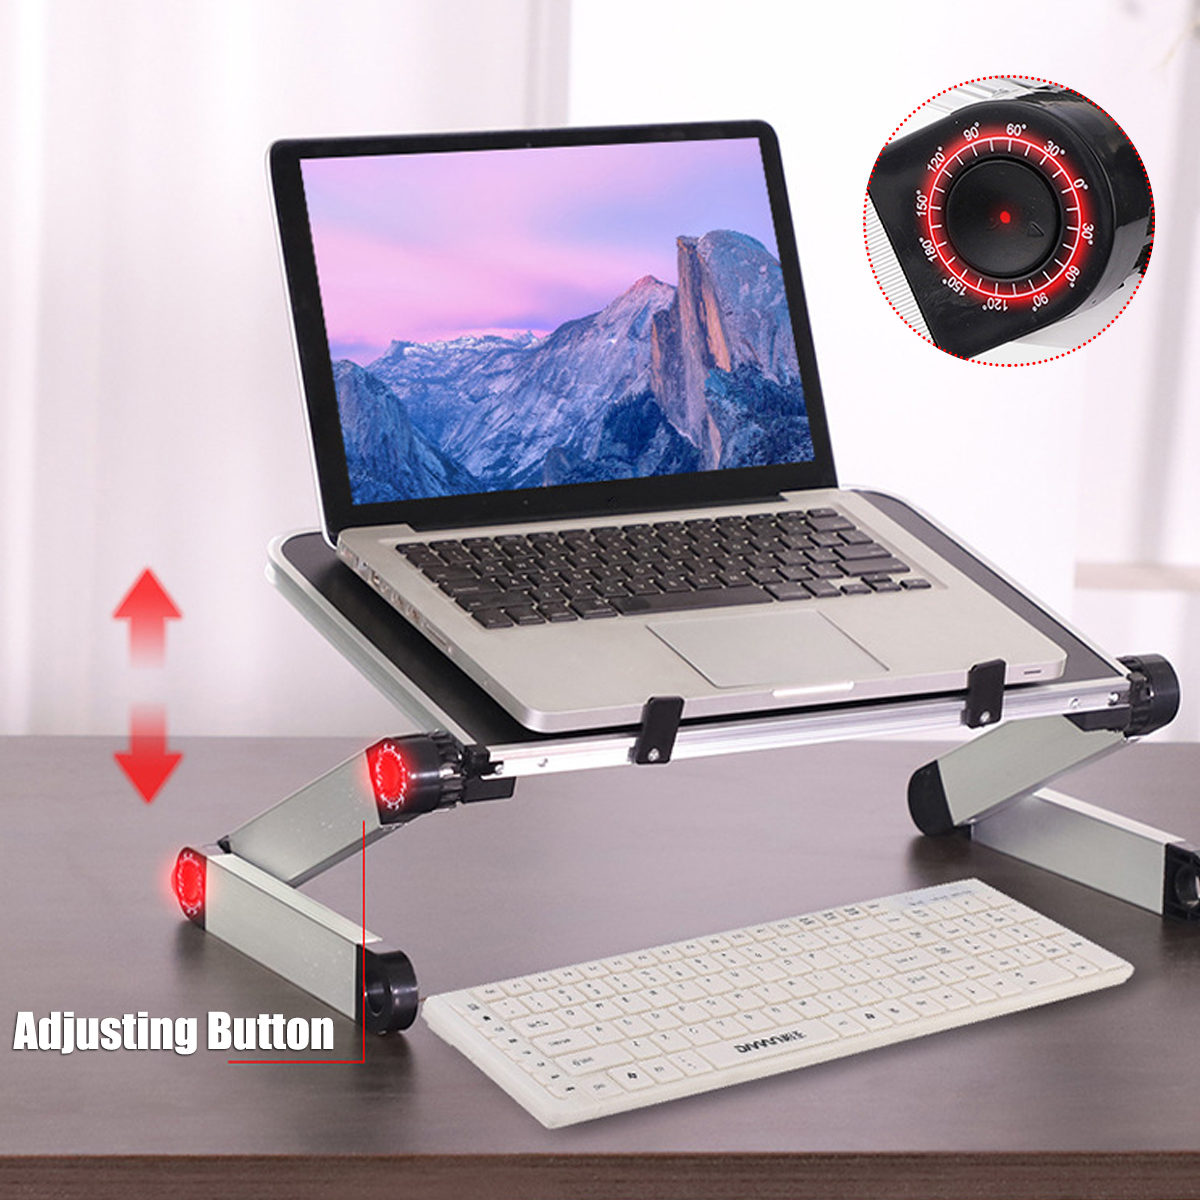 4026cm-Enlarge-Foldable-with-Cooling-Fan-Hole-Aluminum-Laptop-Computer-Desk-Table-TV-Bed-Computer-Ma-1653497-12